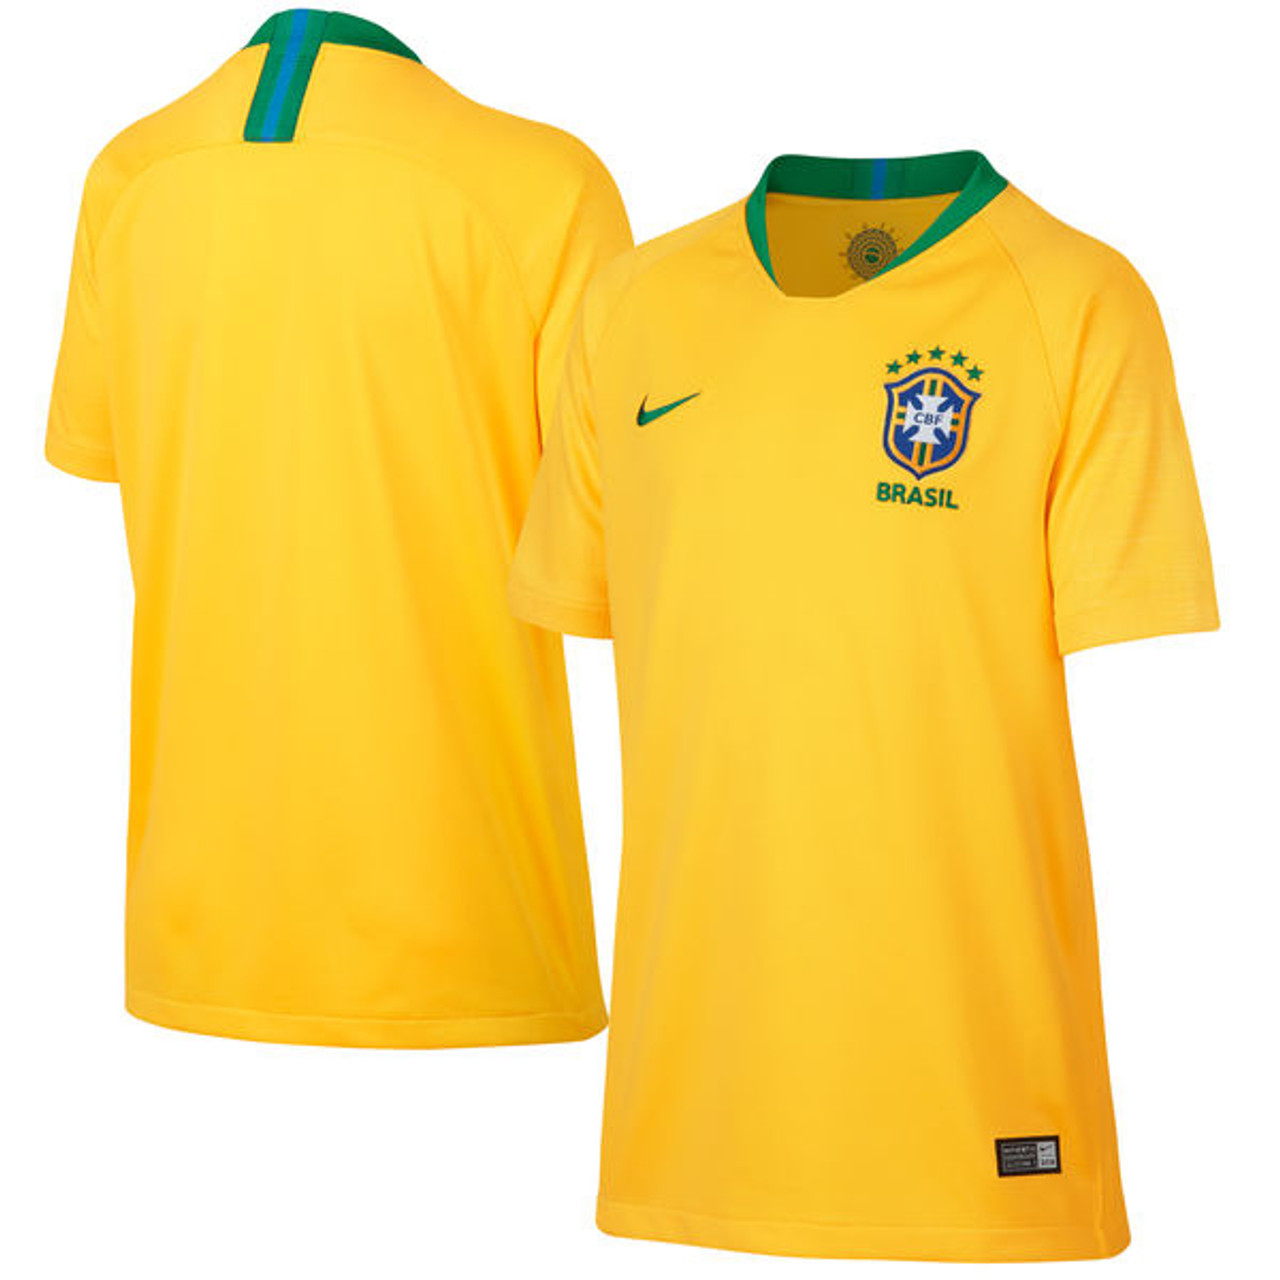 Nike Unveils Classic Brazil 2018 World Cup Kit